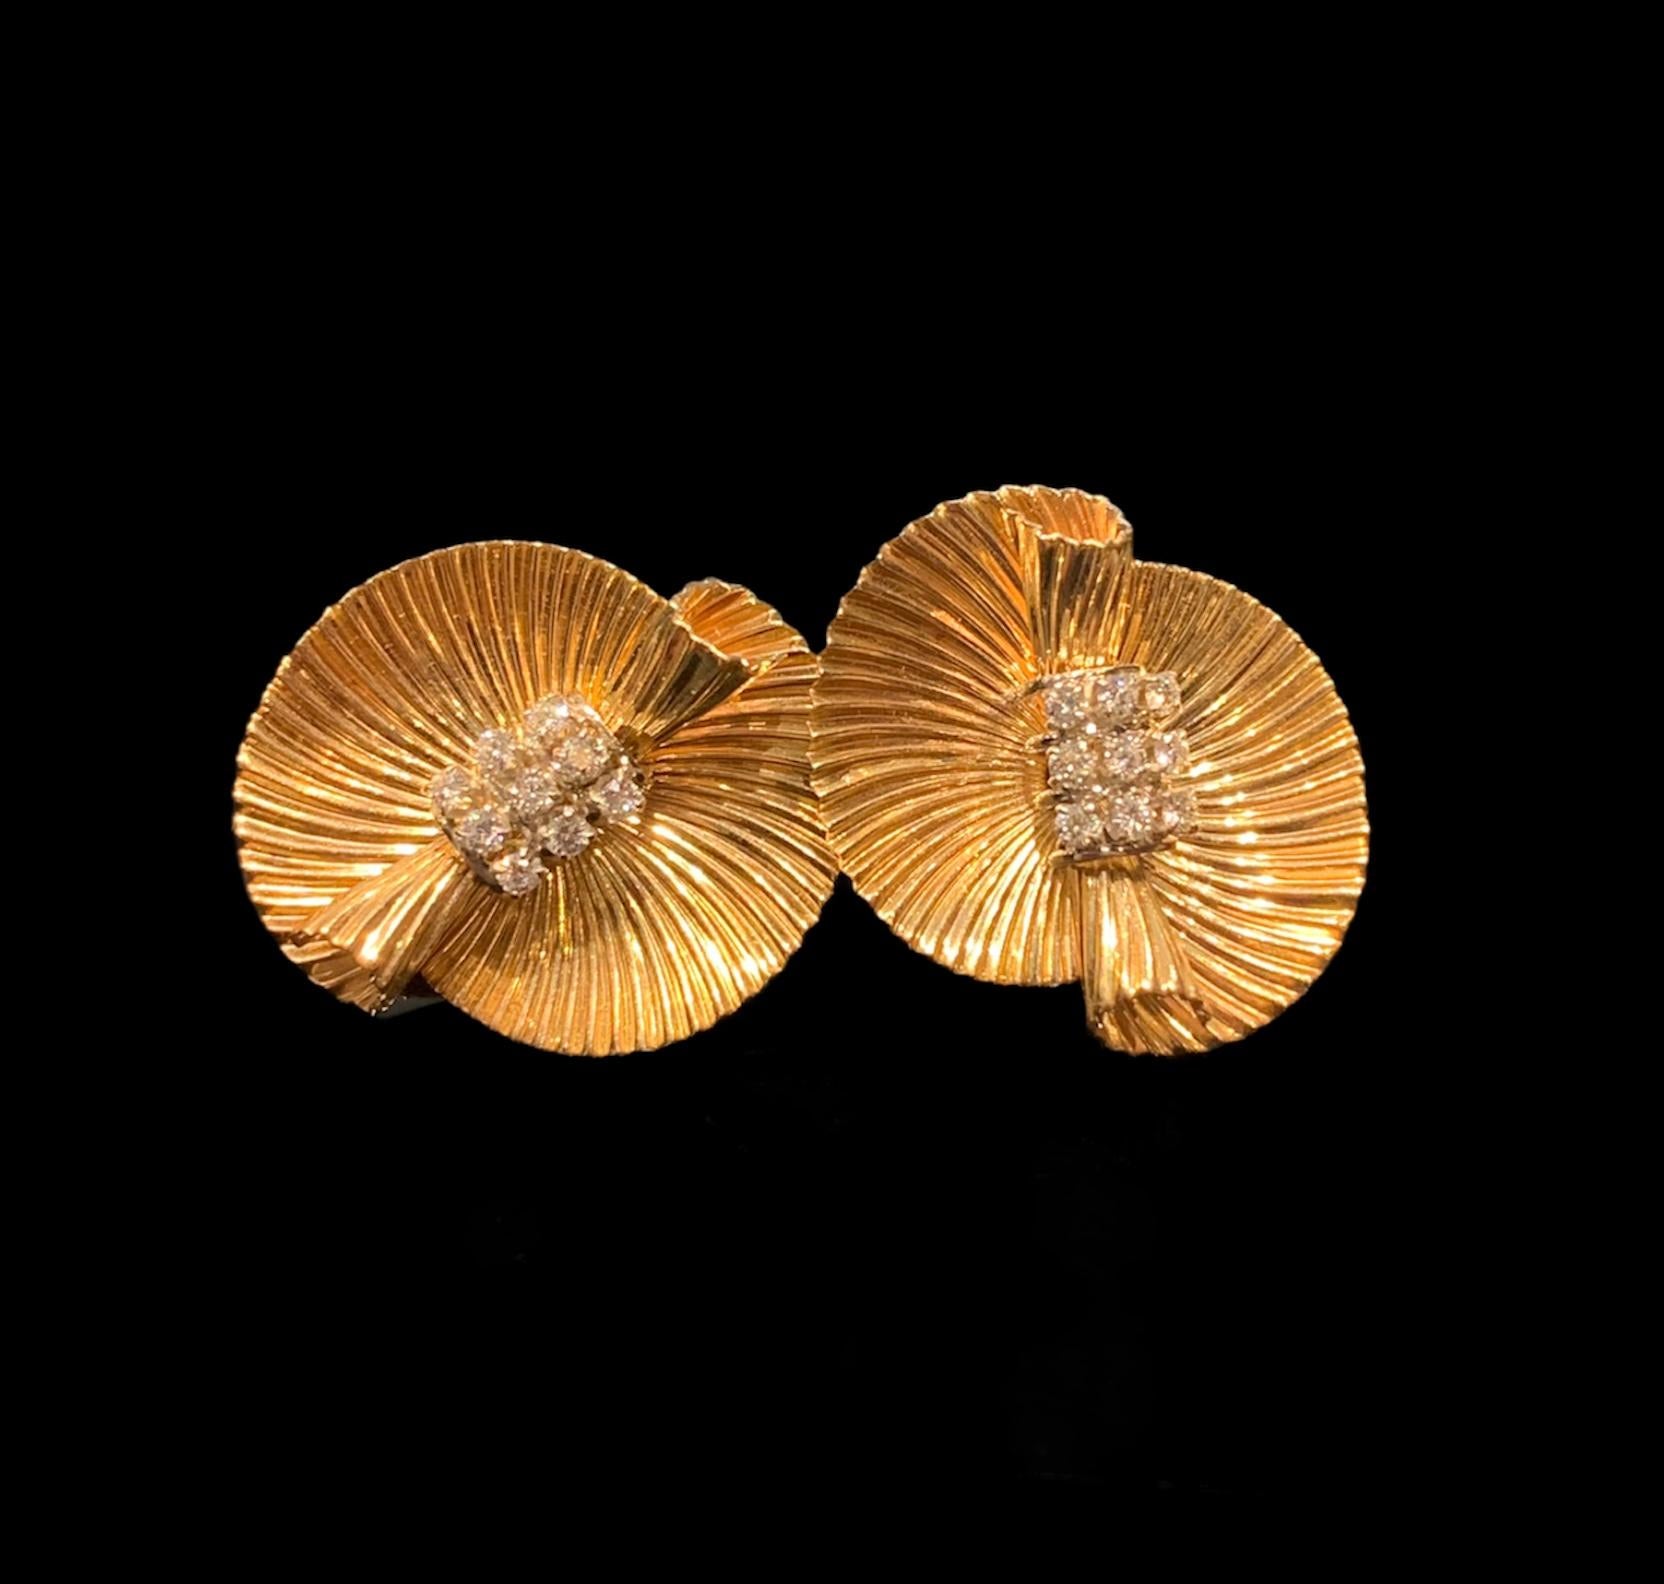 Beautiful vintage diamond earrings Shells created by the famous French jewellery house Cartier. 

The earrings are made of twisted 18 Karat yellow gold and decorated with 9 diamonds each. Approximative weight of the diamonds is 0,6 carats.

Total